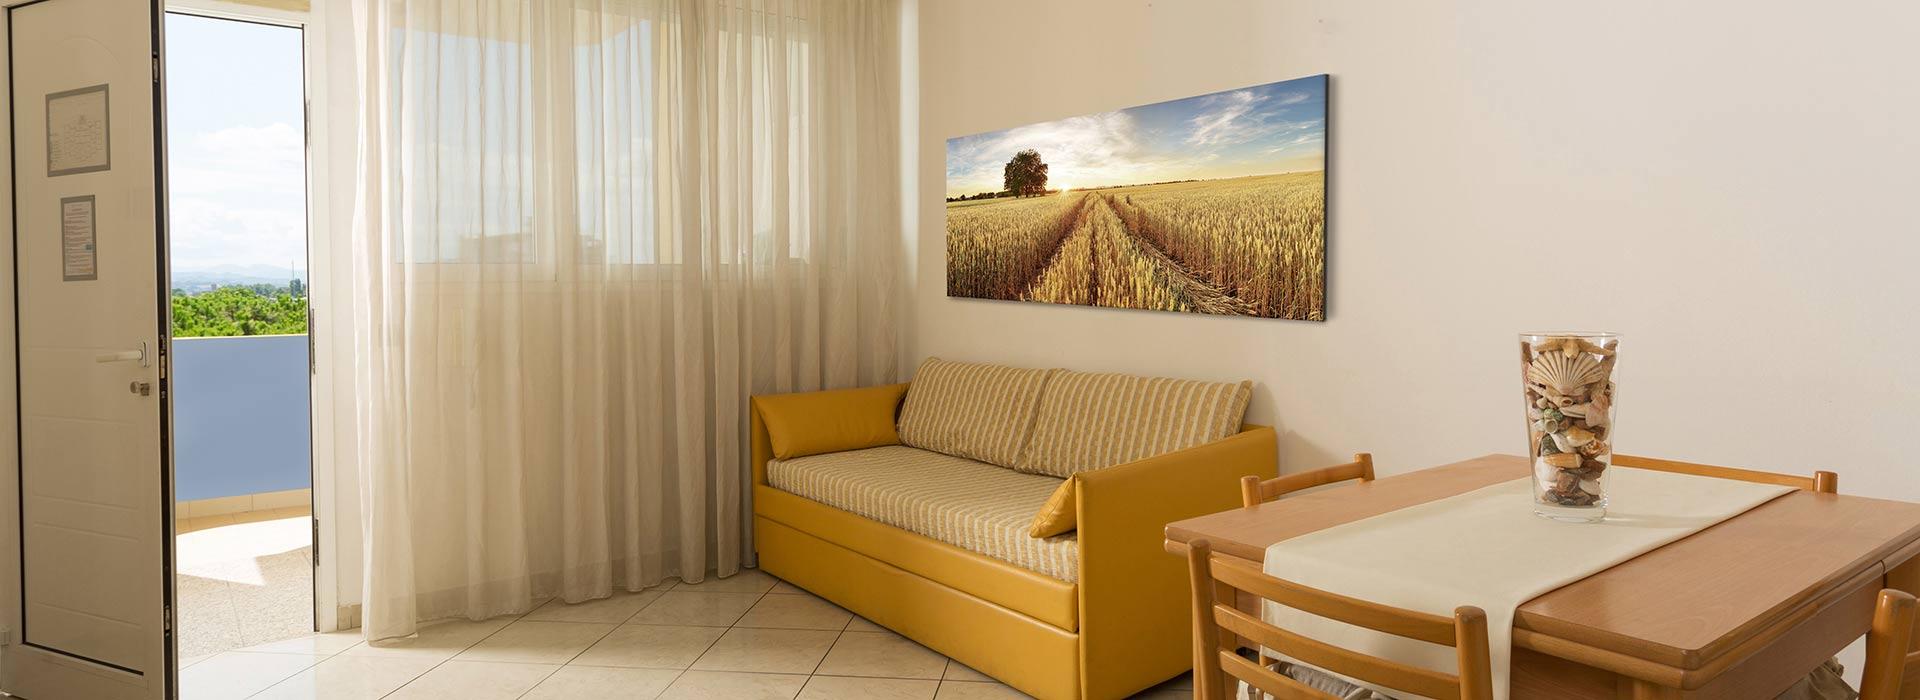 hotelpiccadilly it ttg-rimini-speciale-hotel-residence 001